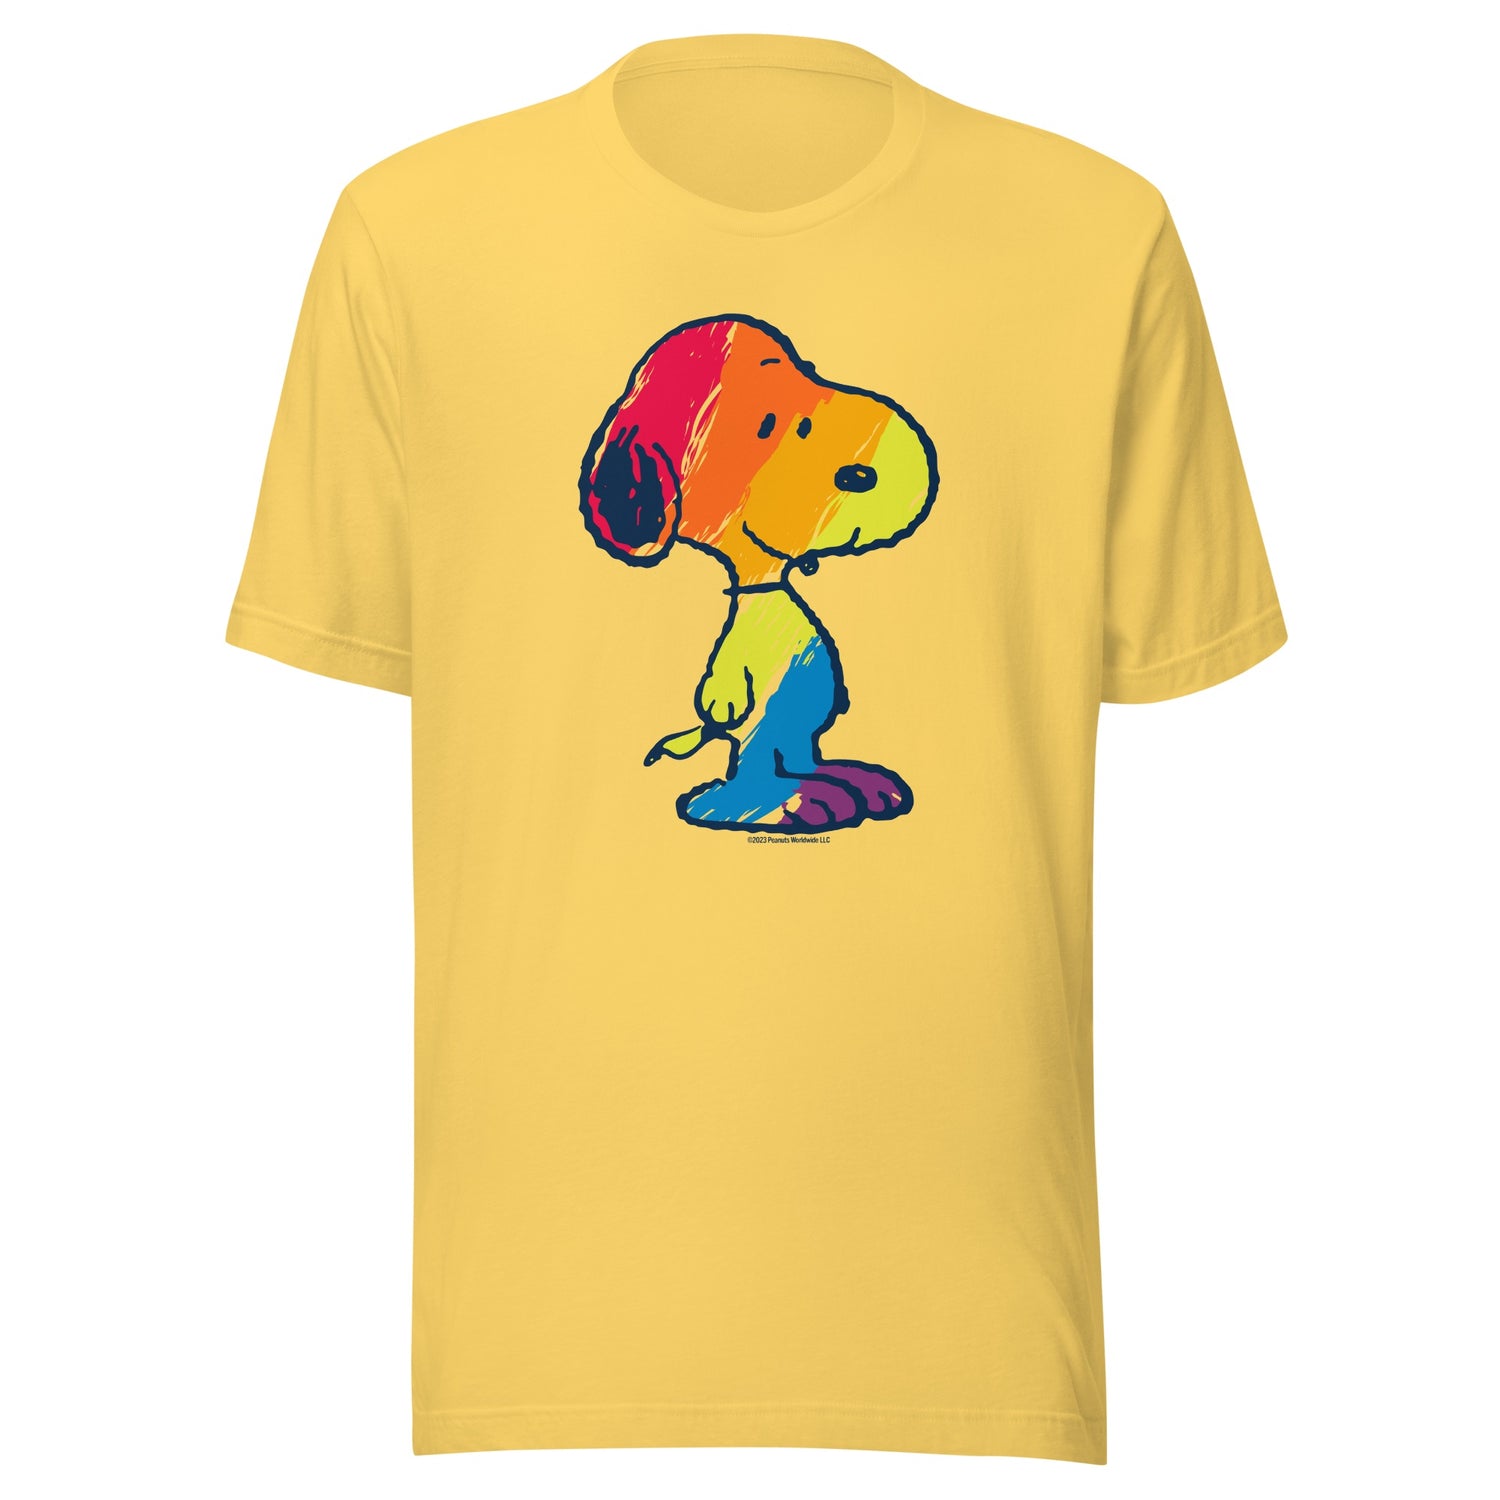 Rainbow The Peanuts Snoopy Store – Adult Colored T-Shirt